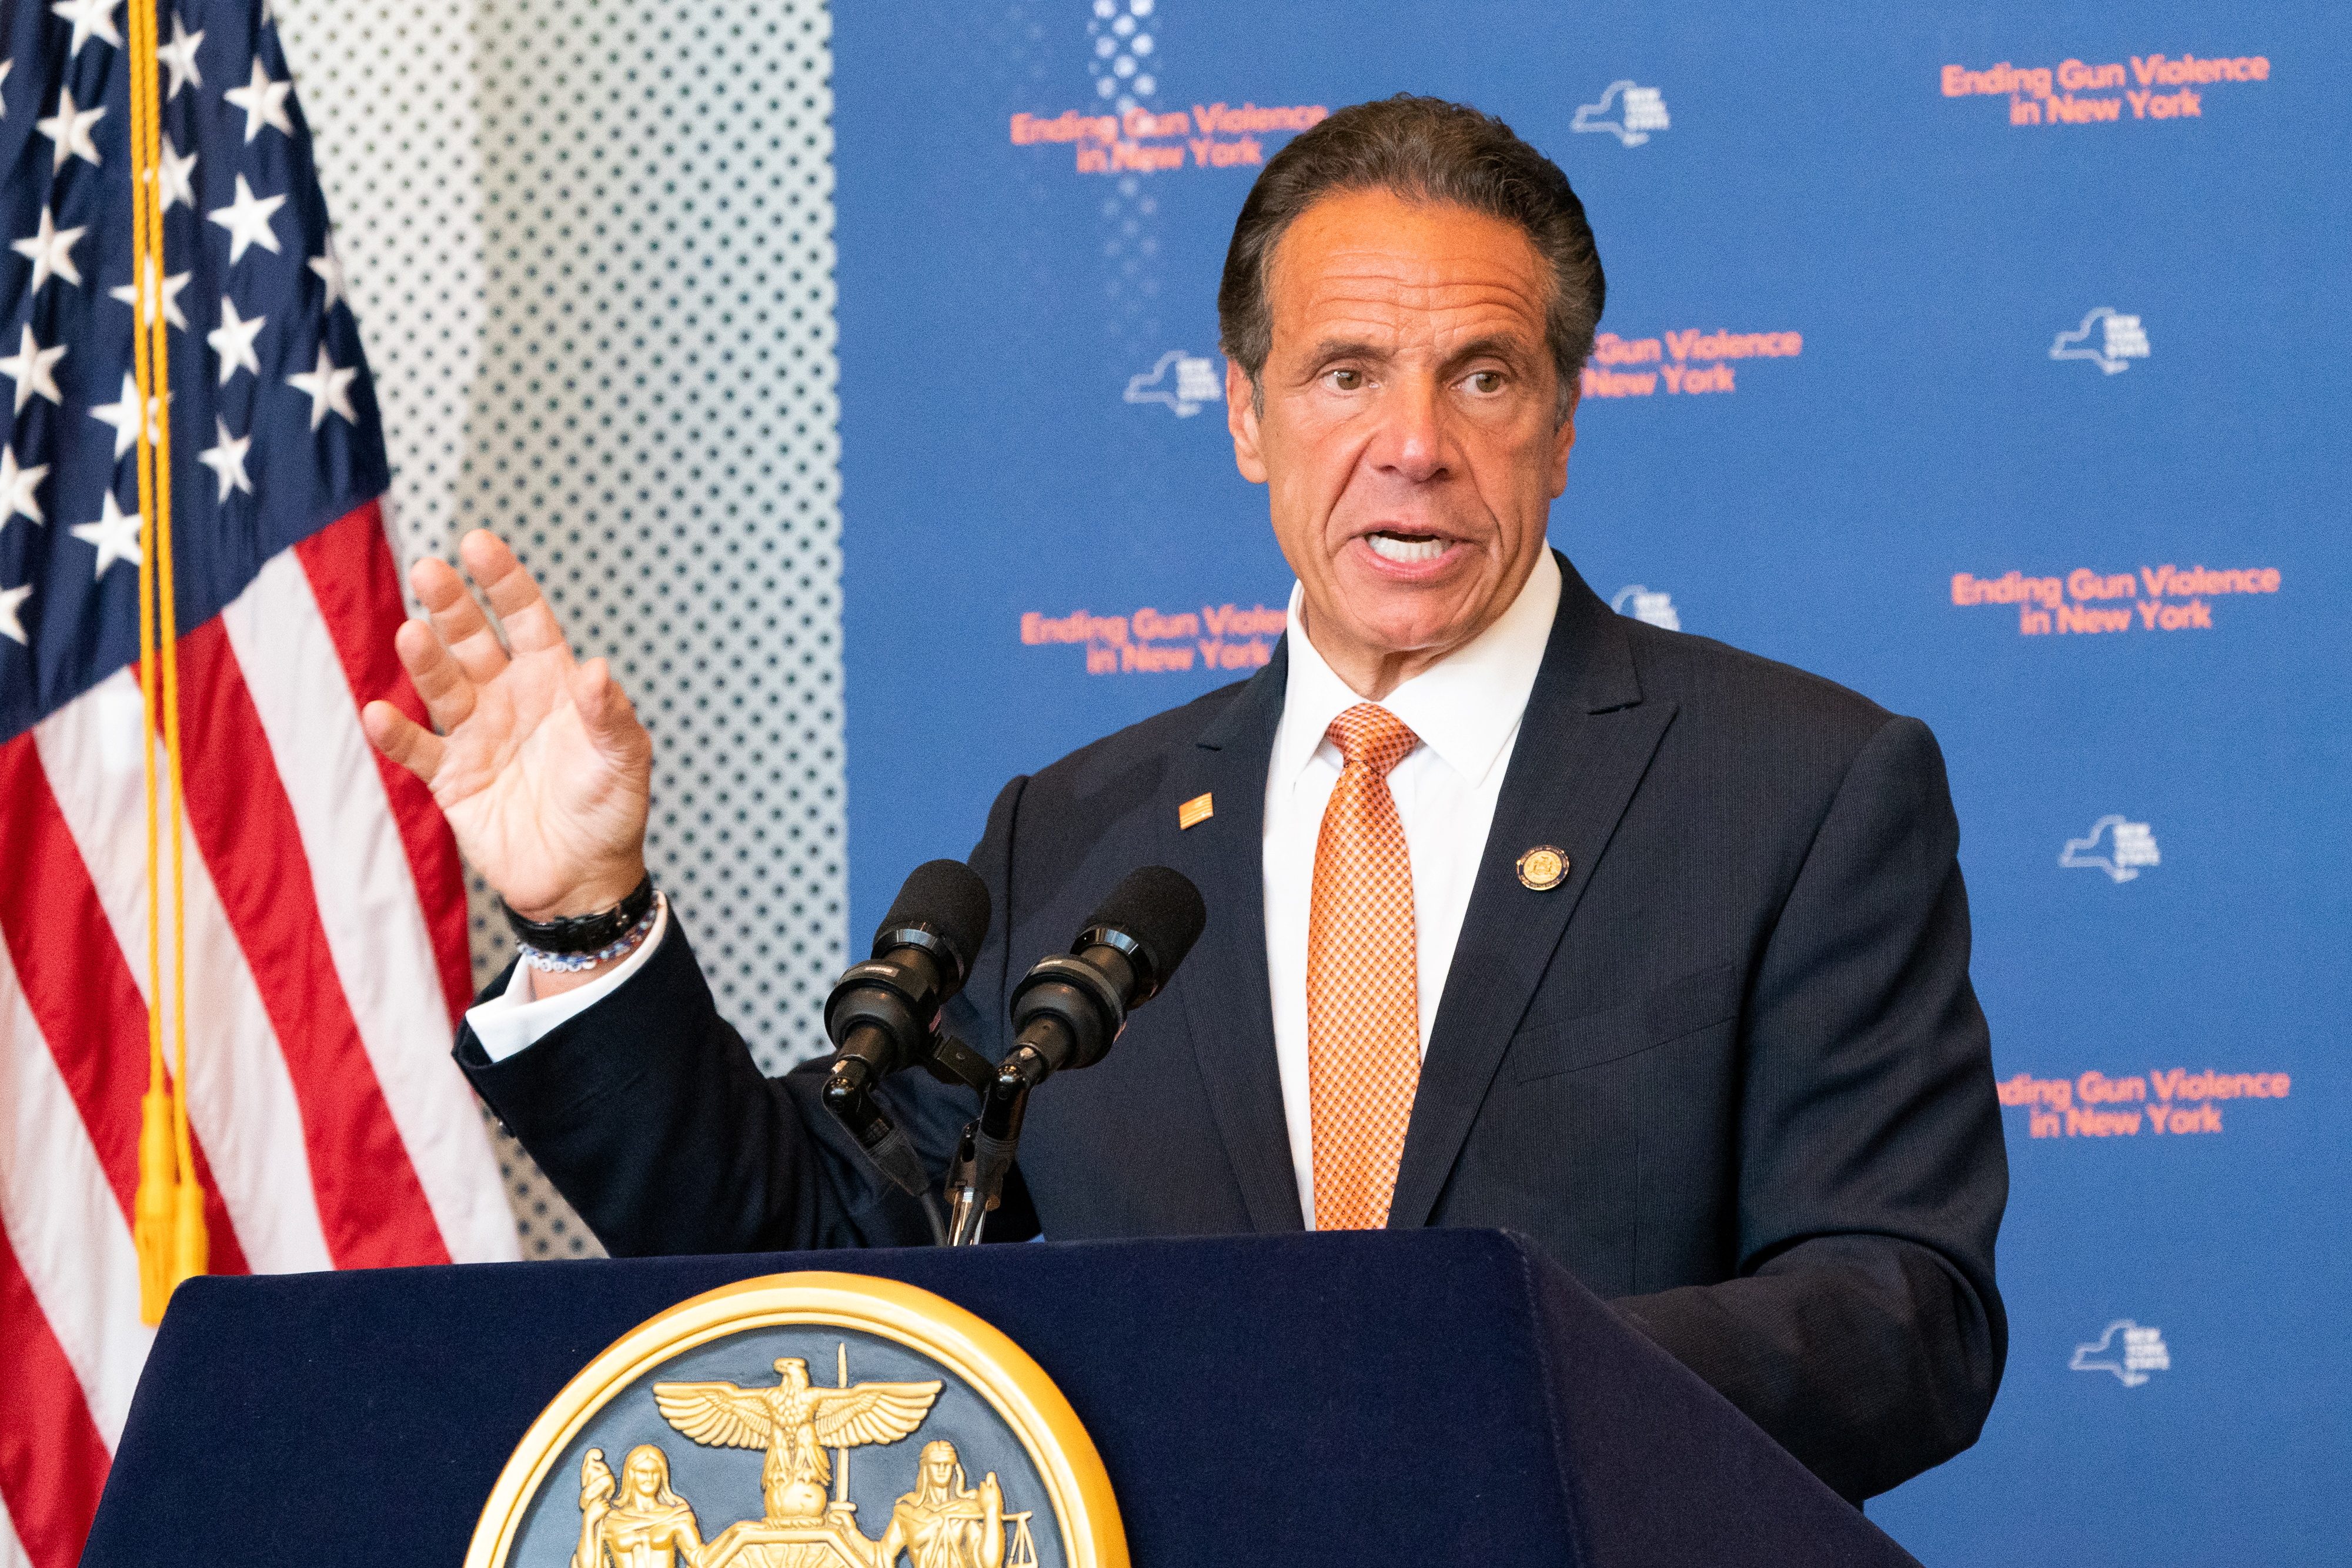 New York Governor Andrew Cuomo signs the bill after making an announcement that Gun Manufacturers are Liable for the harm their products cause, in New York City